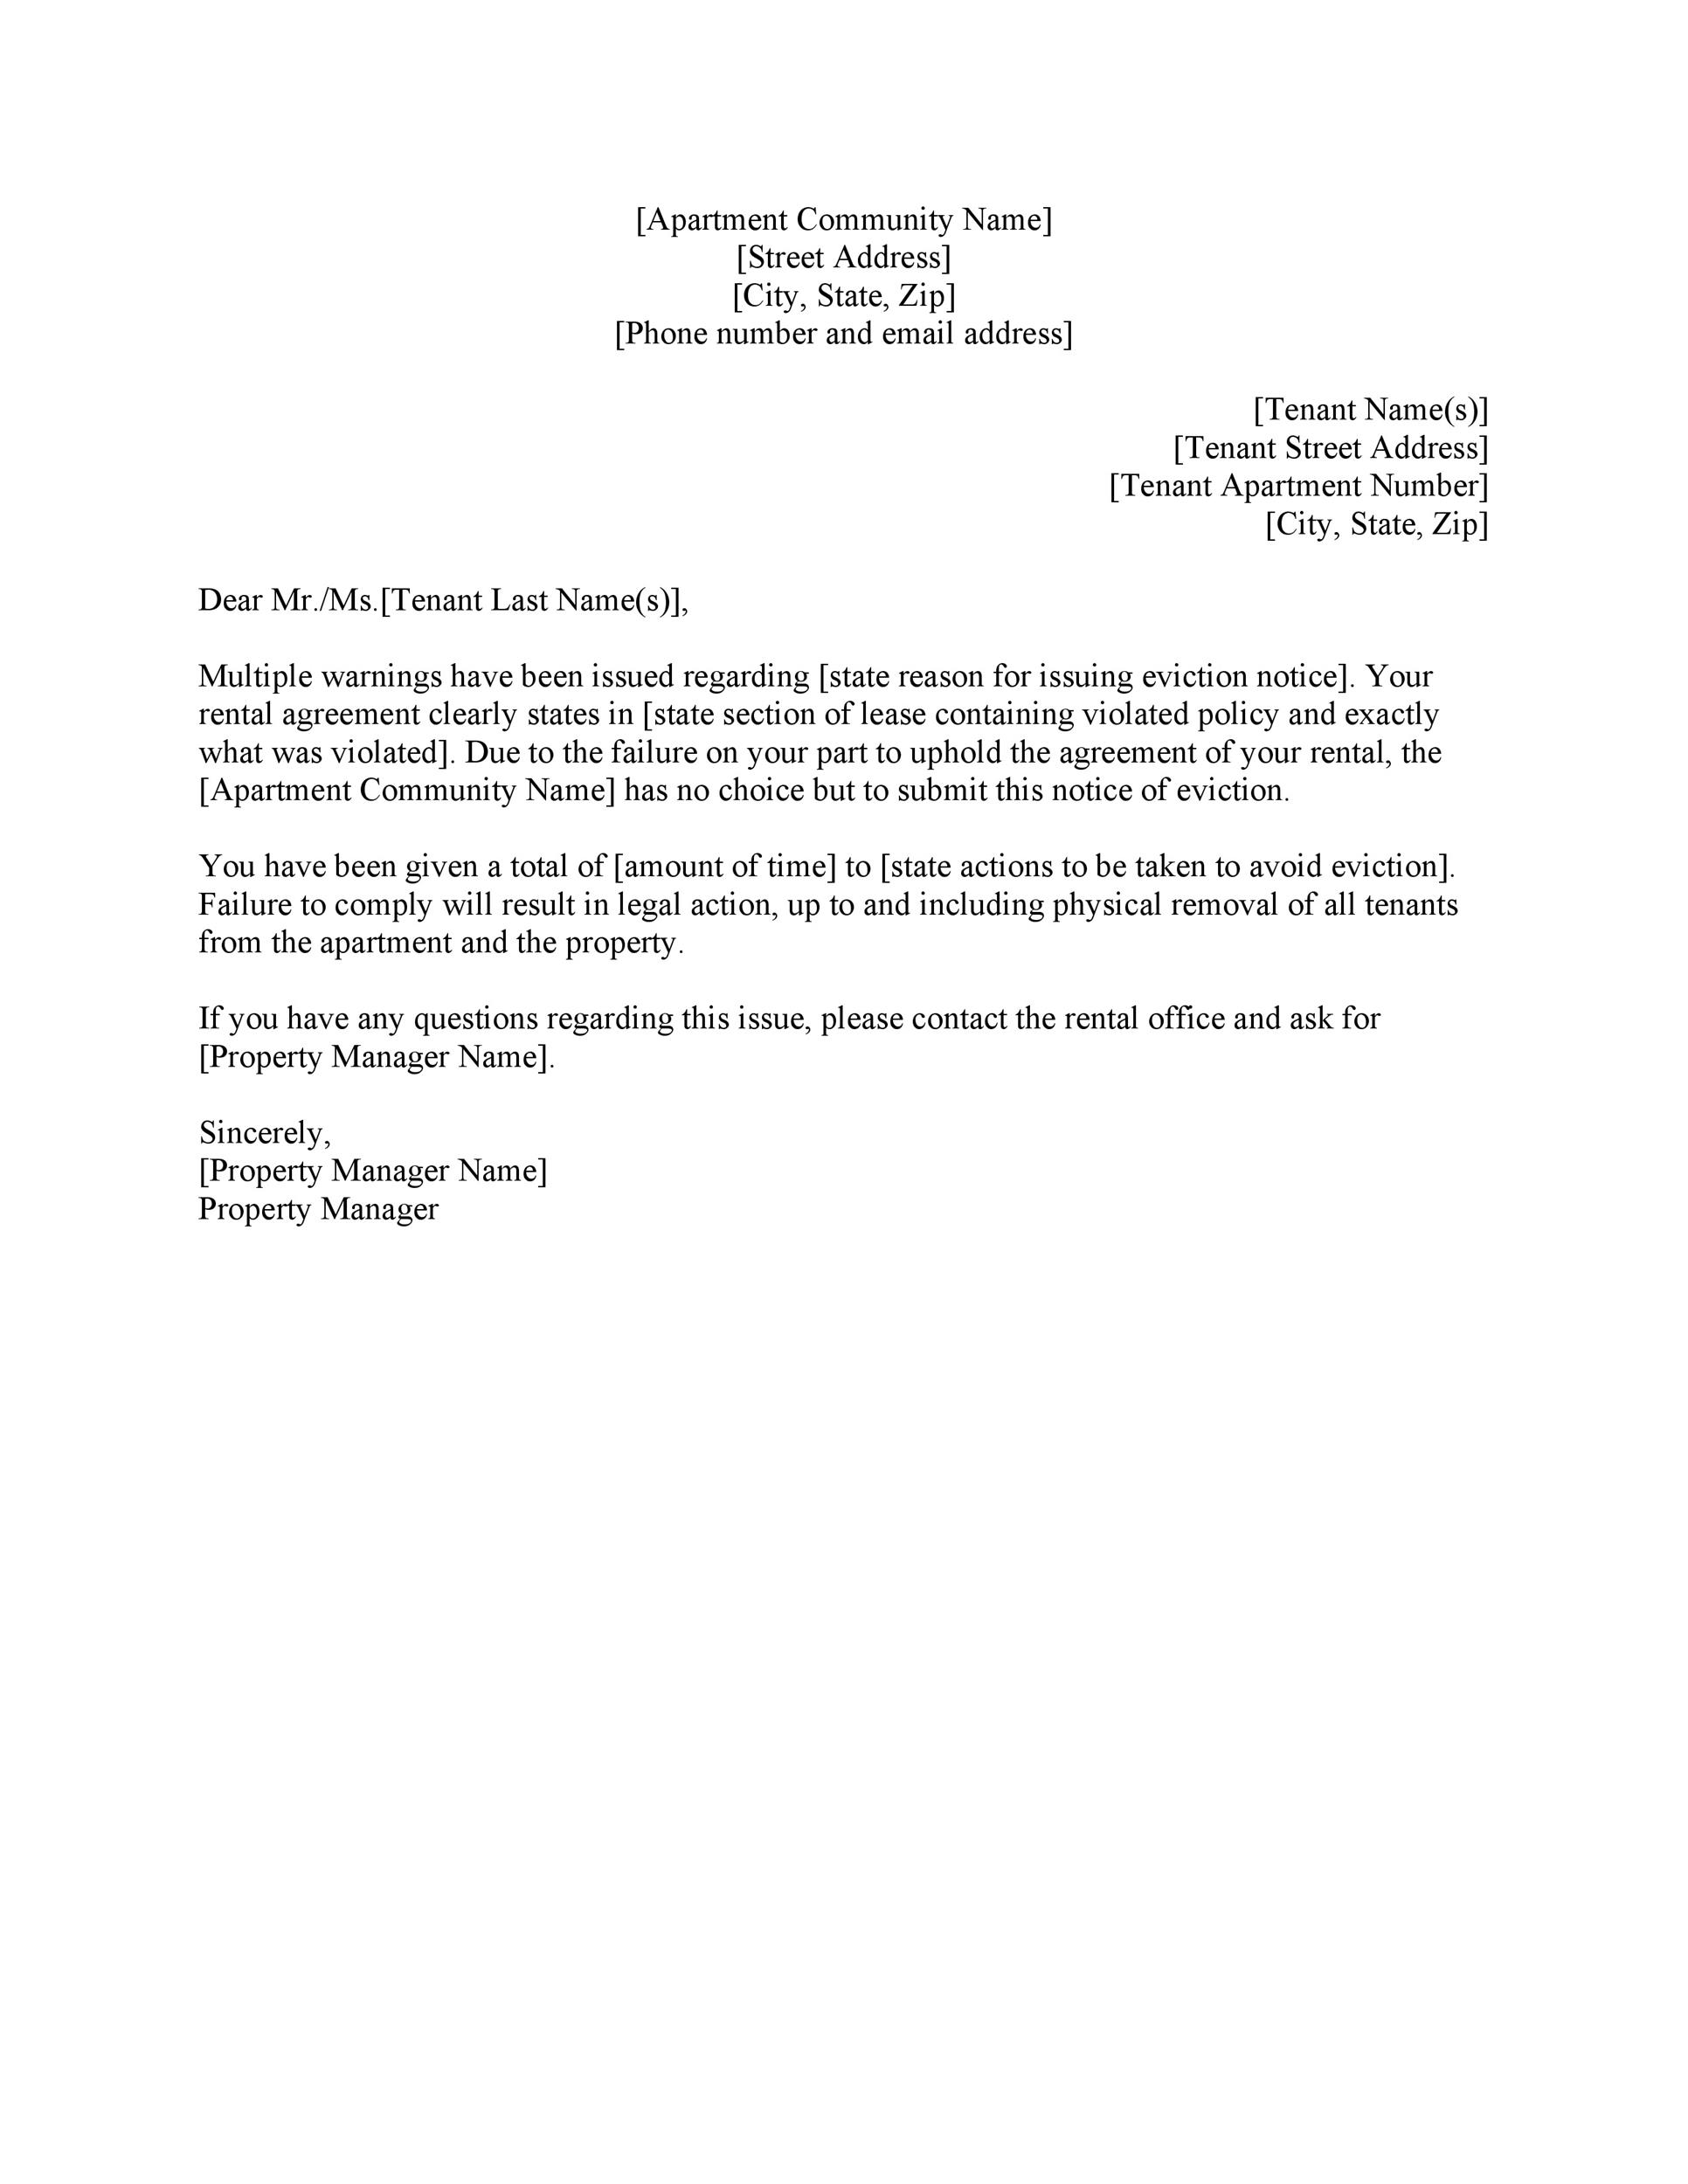 Sample Letter To Vacate Rental Property from templatelab.com